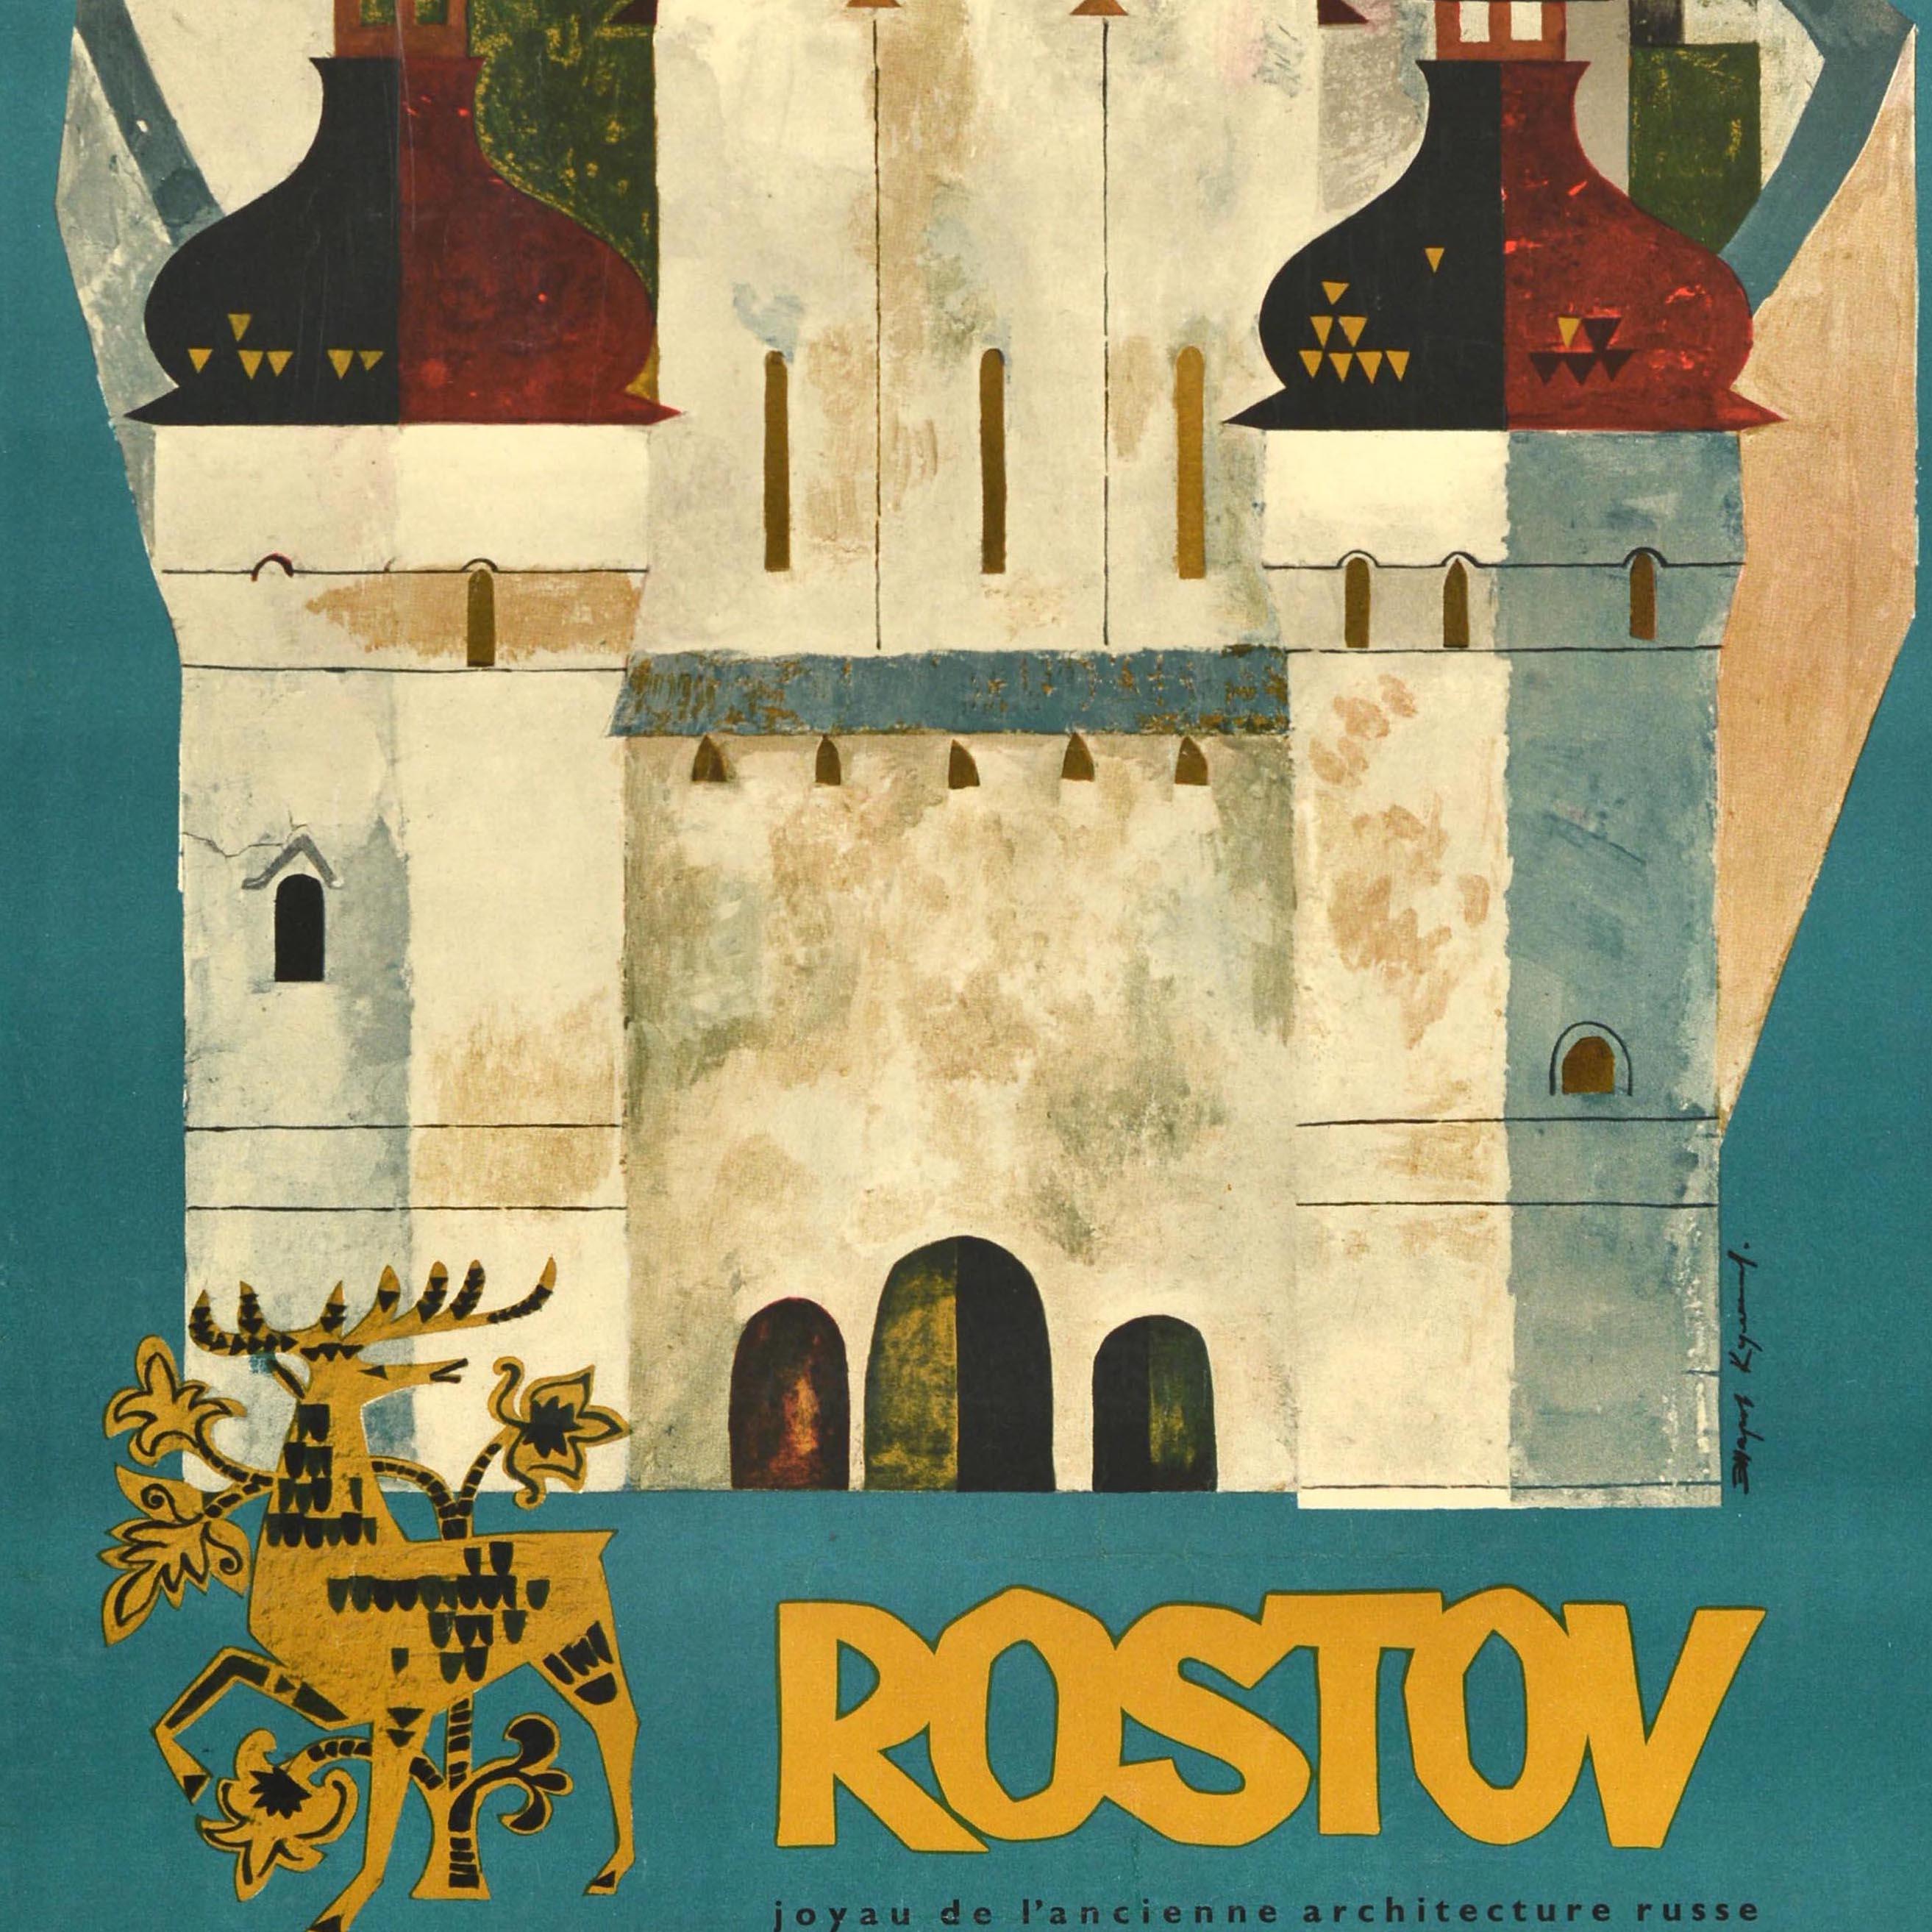 Original vintage Soviet travel advertising poster in French - Rostov joyau de l'ancienne architecture russe / Rostov the jewel of ancient Russian architecture - issued by the state tourism agency Intourist to promote the old town of Rostov (founded